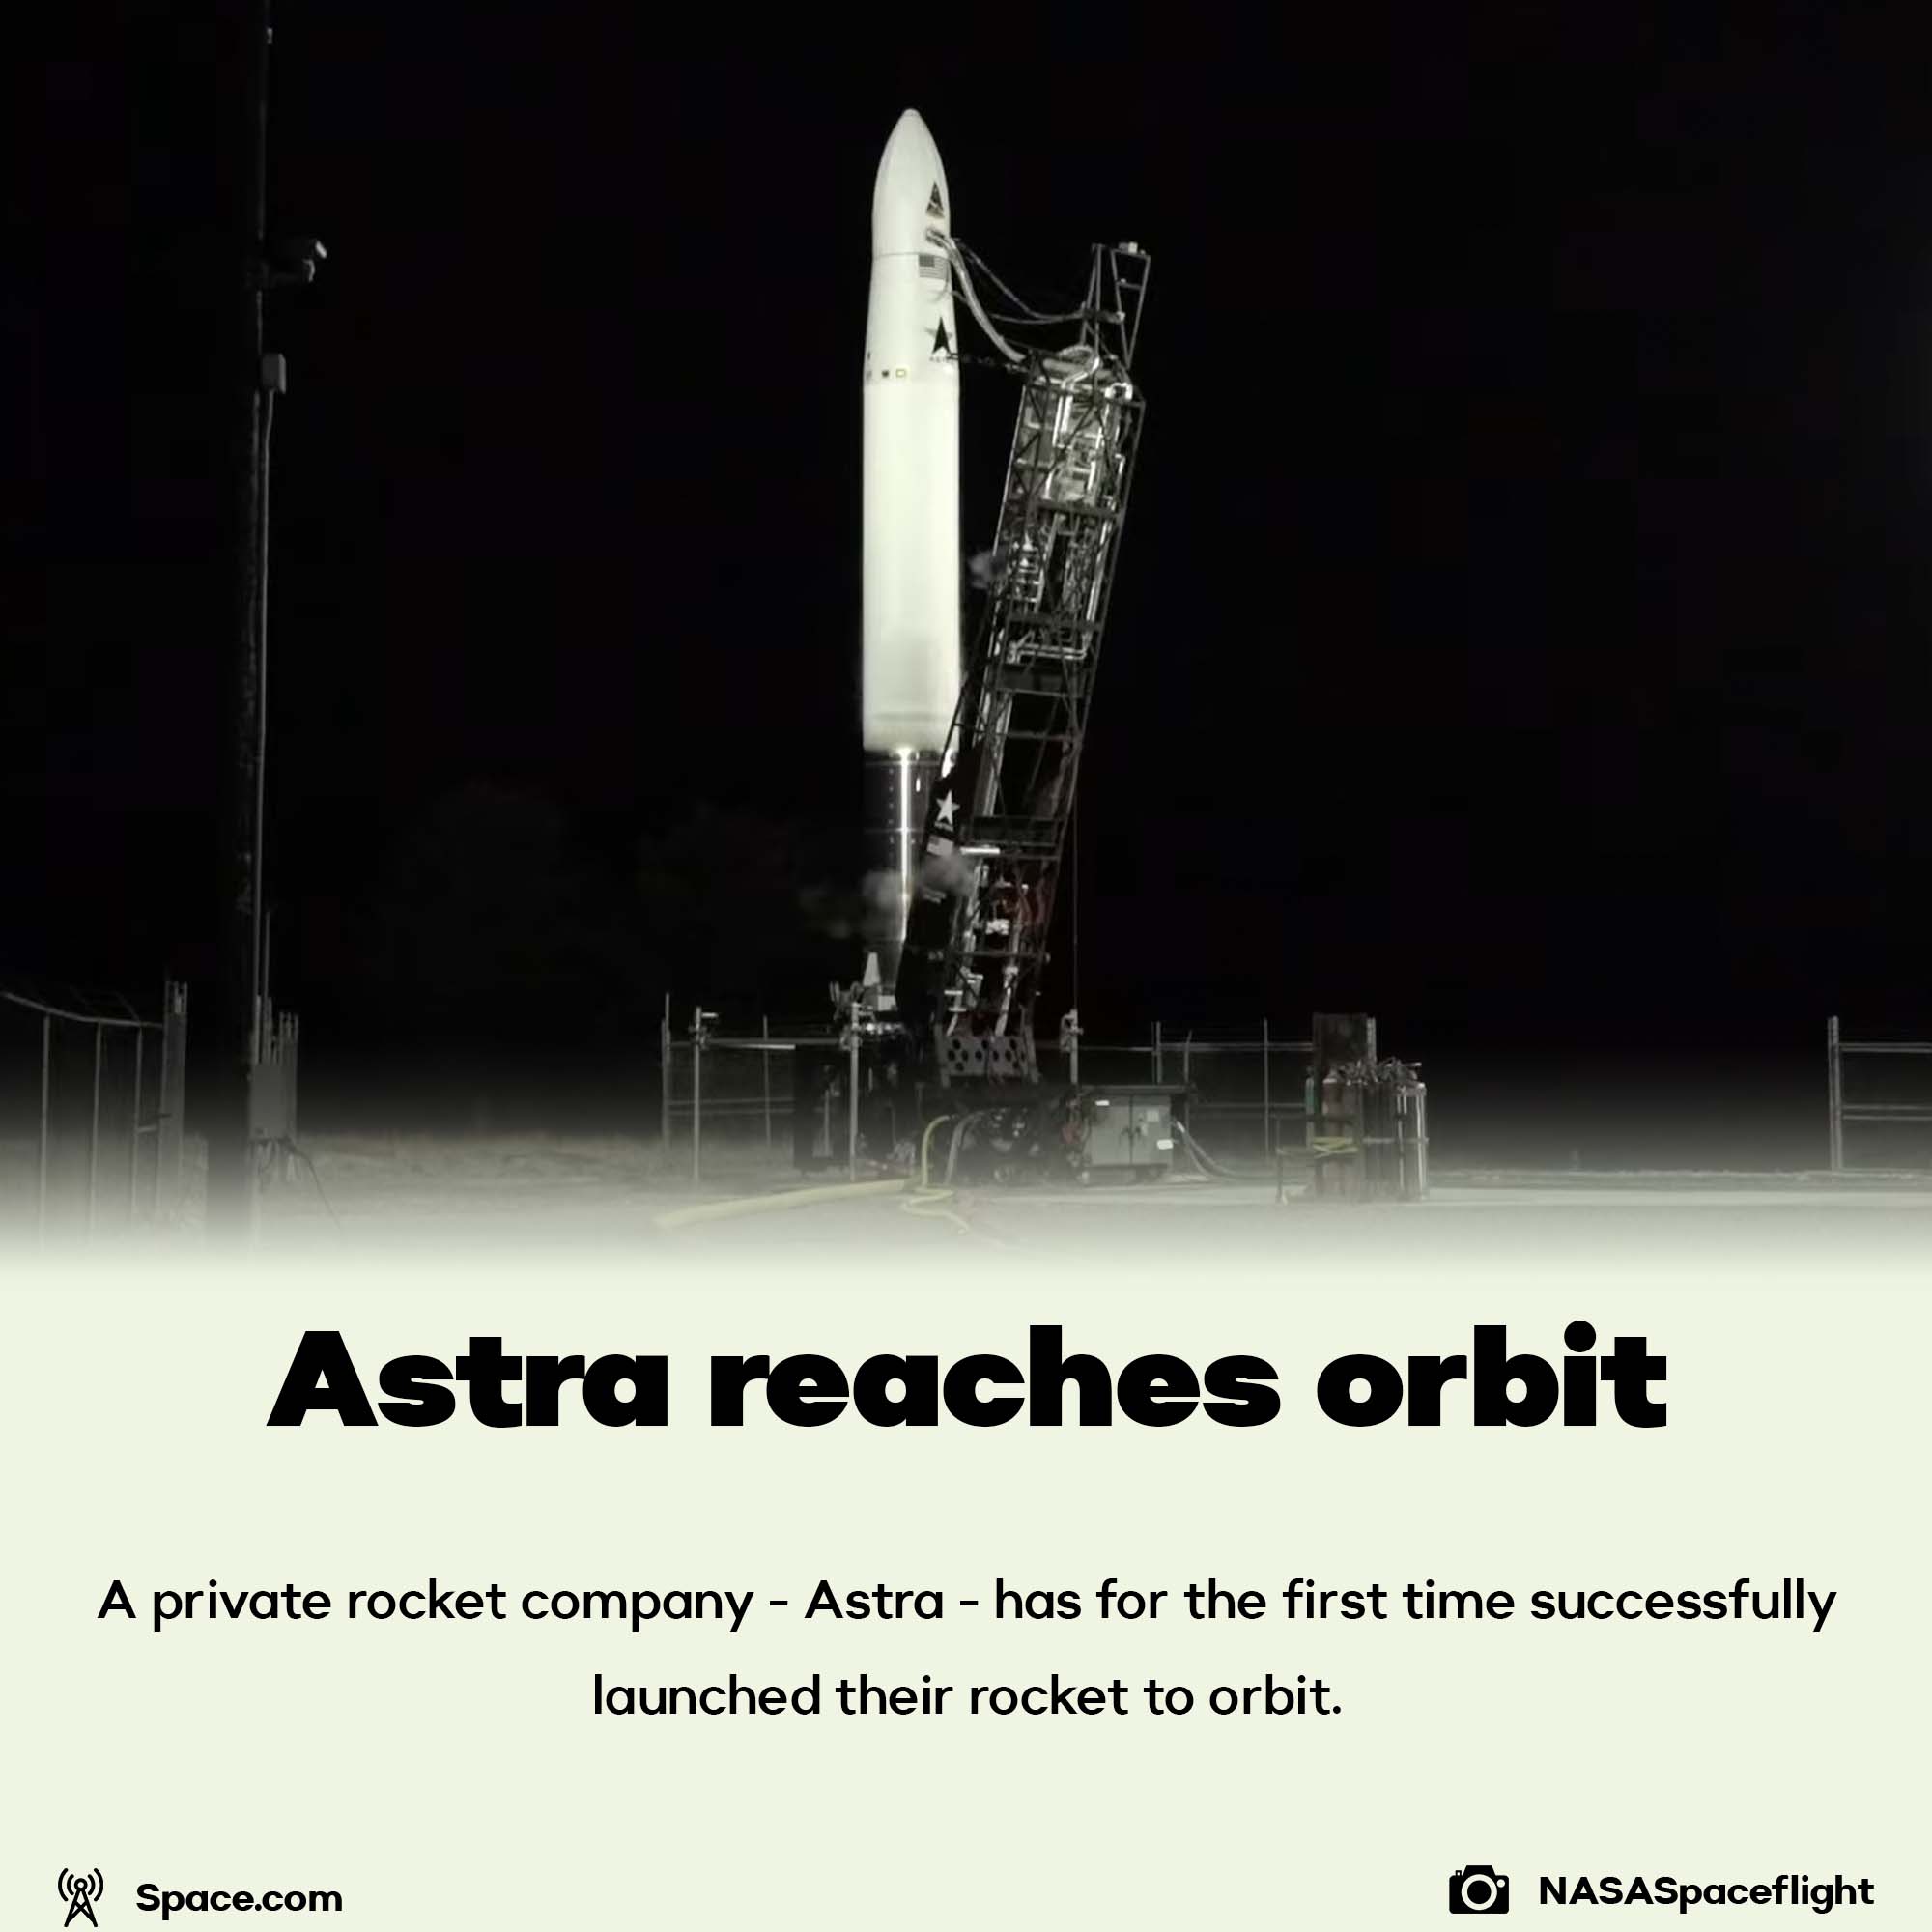 Astra reaches orbit for the first time